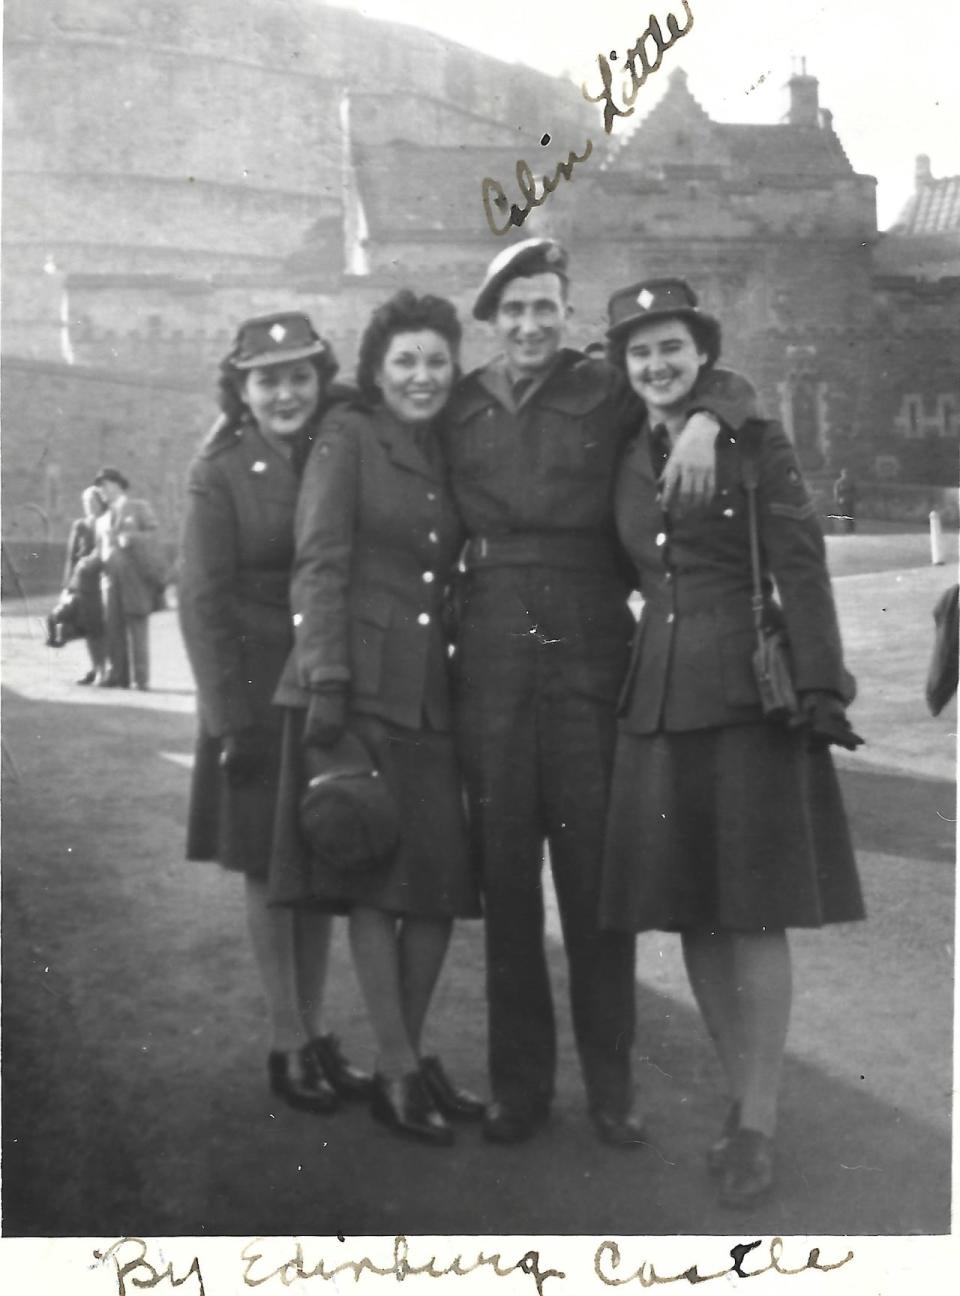 Blanche and Rachael Thomas, at left, are shown with two friends at Edinburgh Castle in Scotland during their Second World War service. 